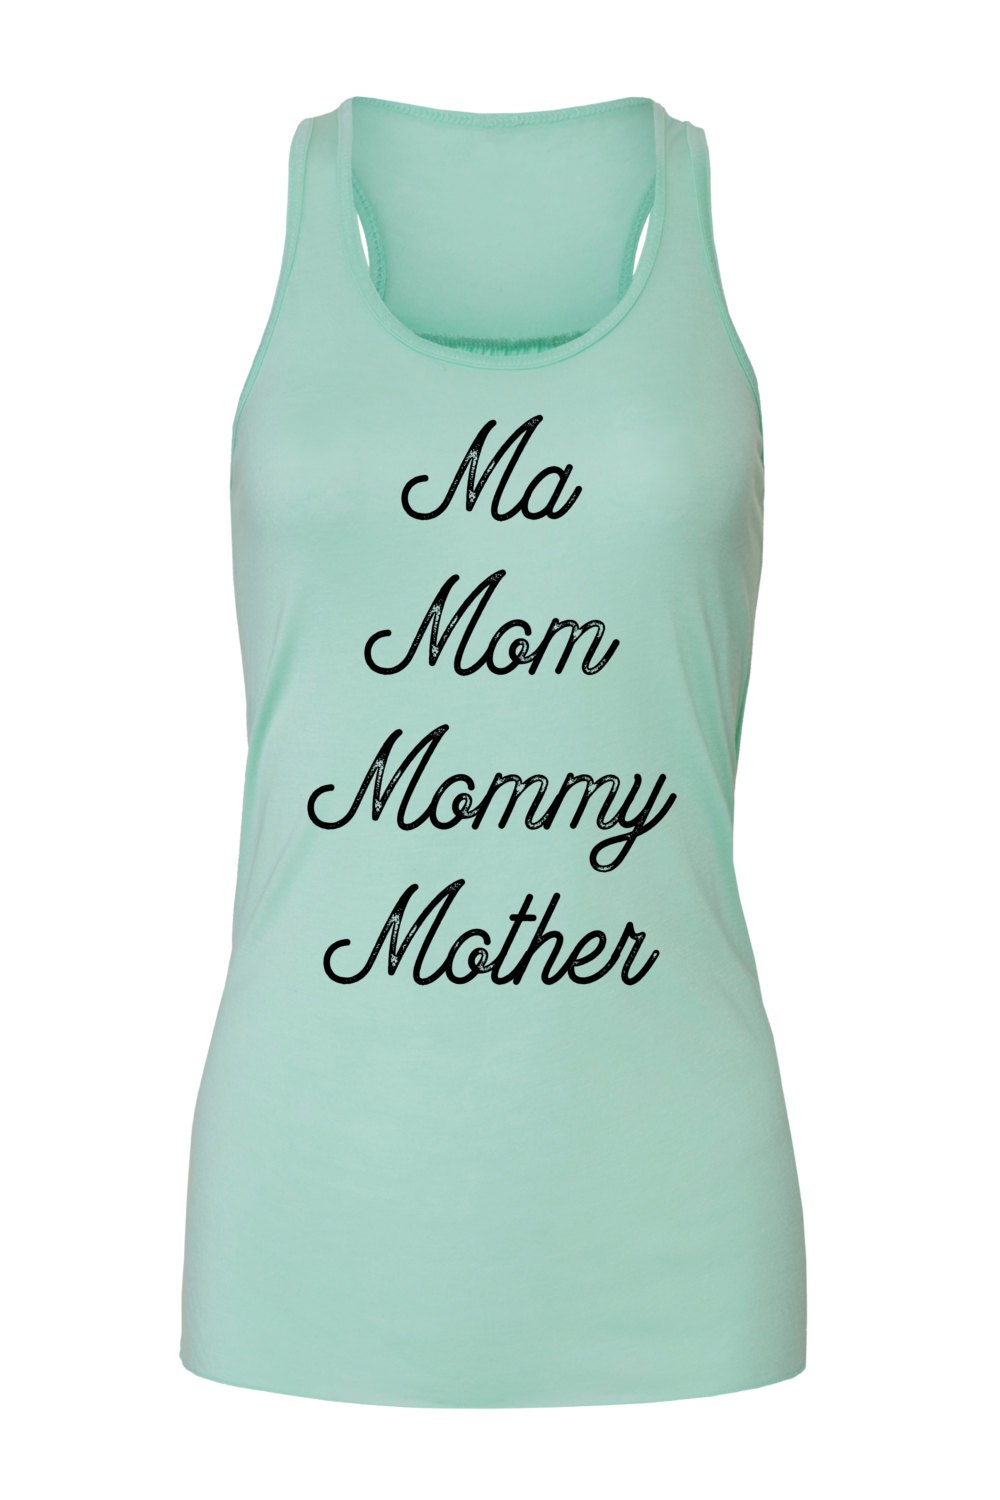 Ma Mom Mommy Mother flowy tank/ Mom tank top/ by DylansDesignsInc